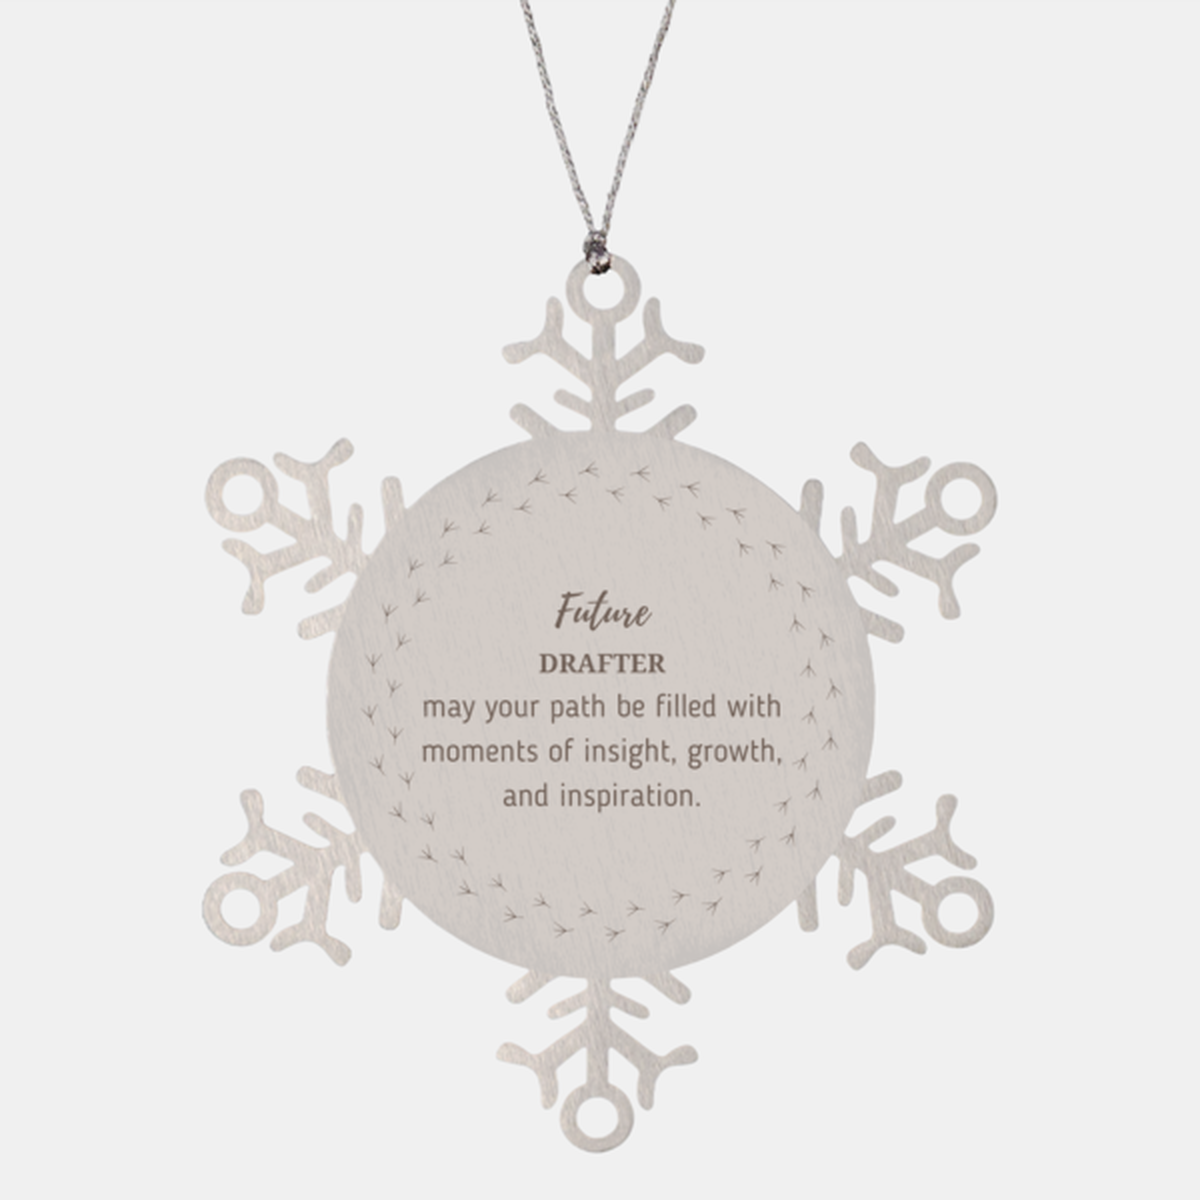 Future Drafter Gifts, May your path be filled with moments of insight, Graduation Gifts for New Drafter, Christmas Unique Snowflake Ornament For Men, Women, Friends